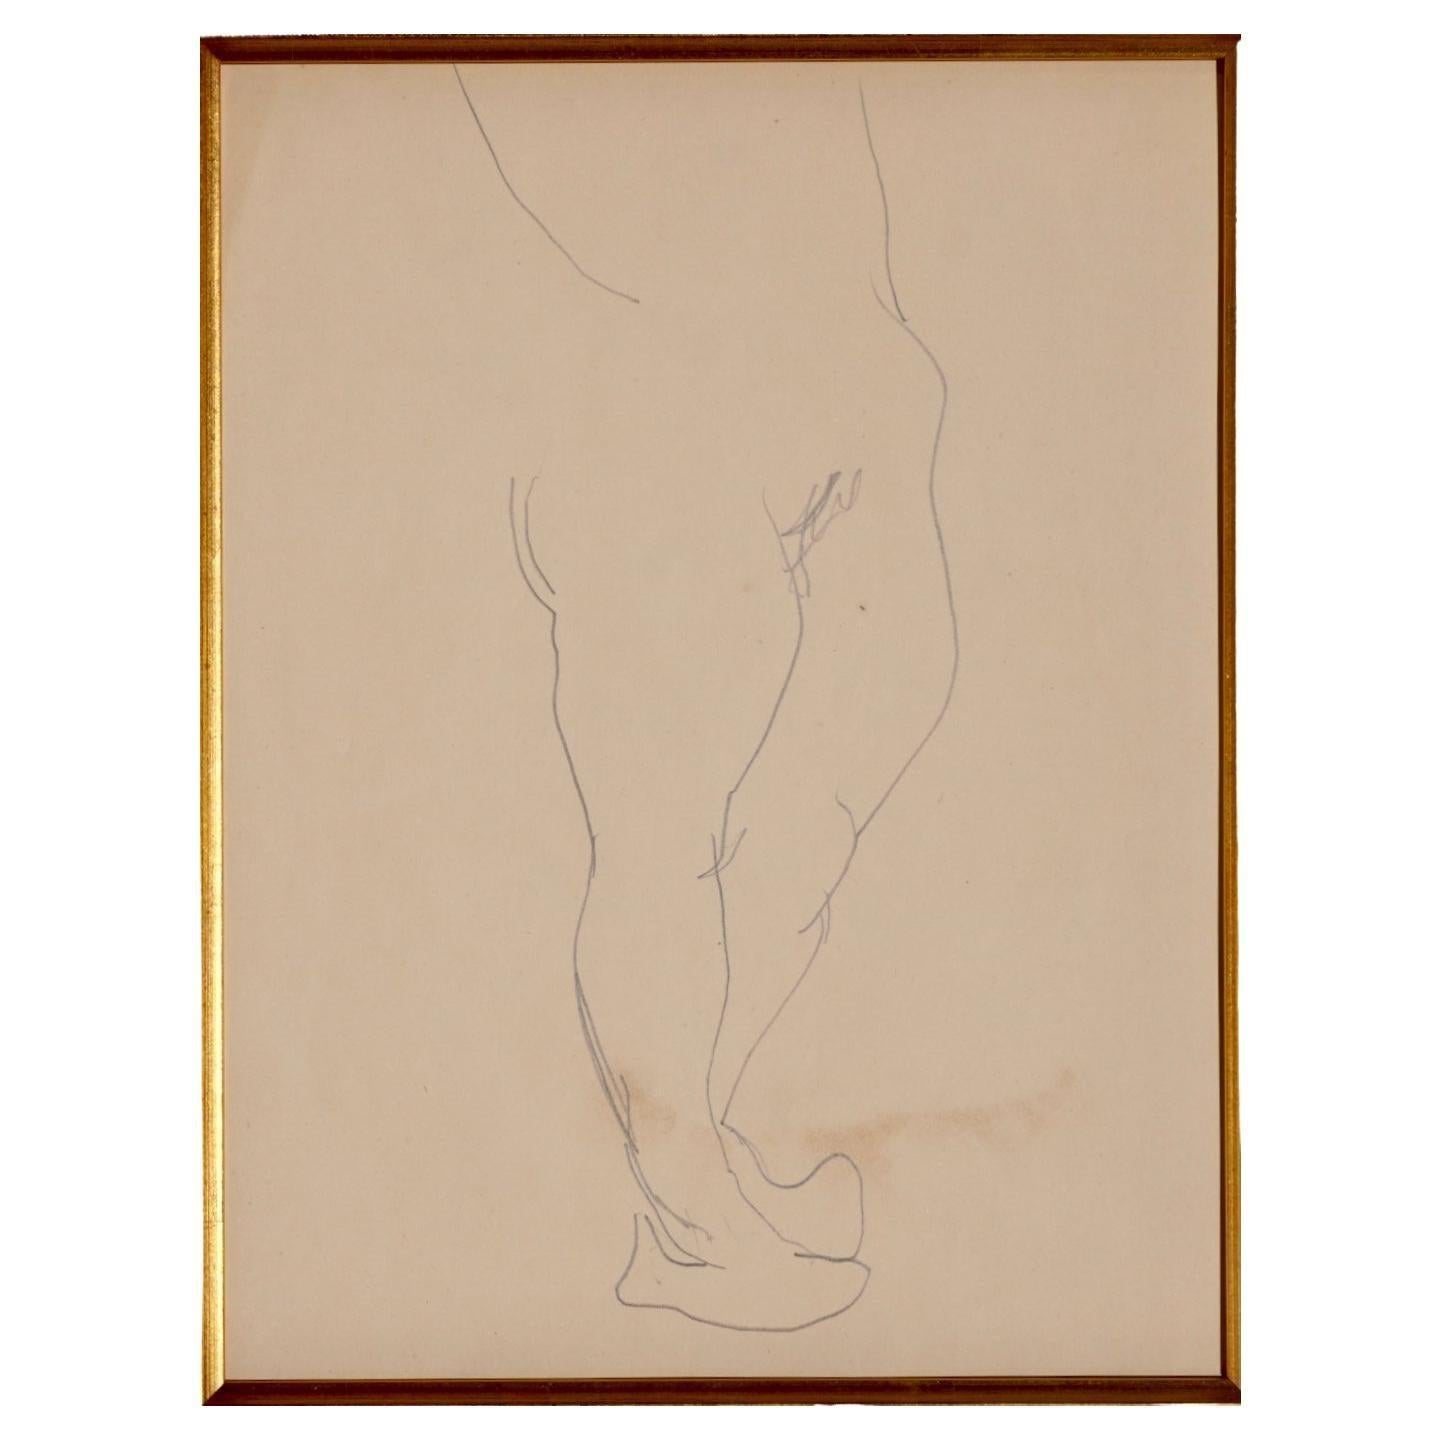 Henri Matisse (French 1869-1954) Pencil Drawing Of A nude torso Catalogued as Number Z 542 in the Artist Archives  Pencil on paper, c. 1900.  

Sheet: 9 3/8 x 11 3/4 in.  
Framed: 22.5 x 25.5 Museum Frame and Glass  

Note: The authenticity of this